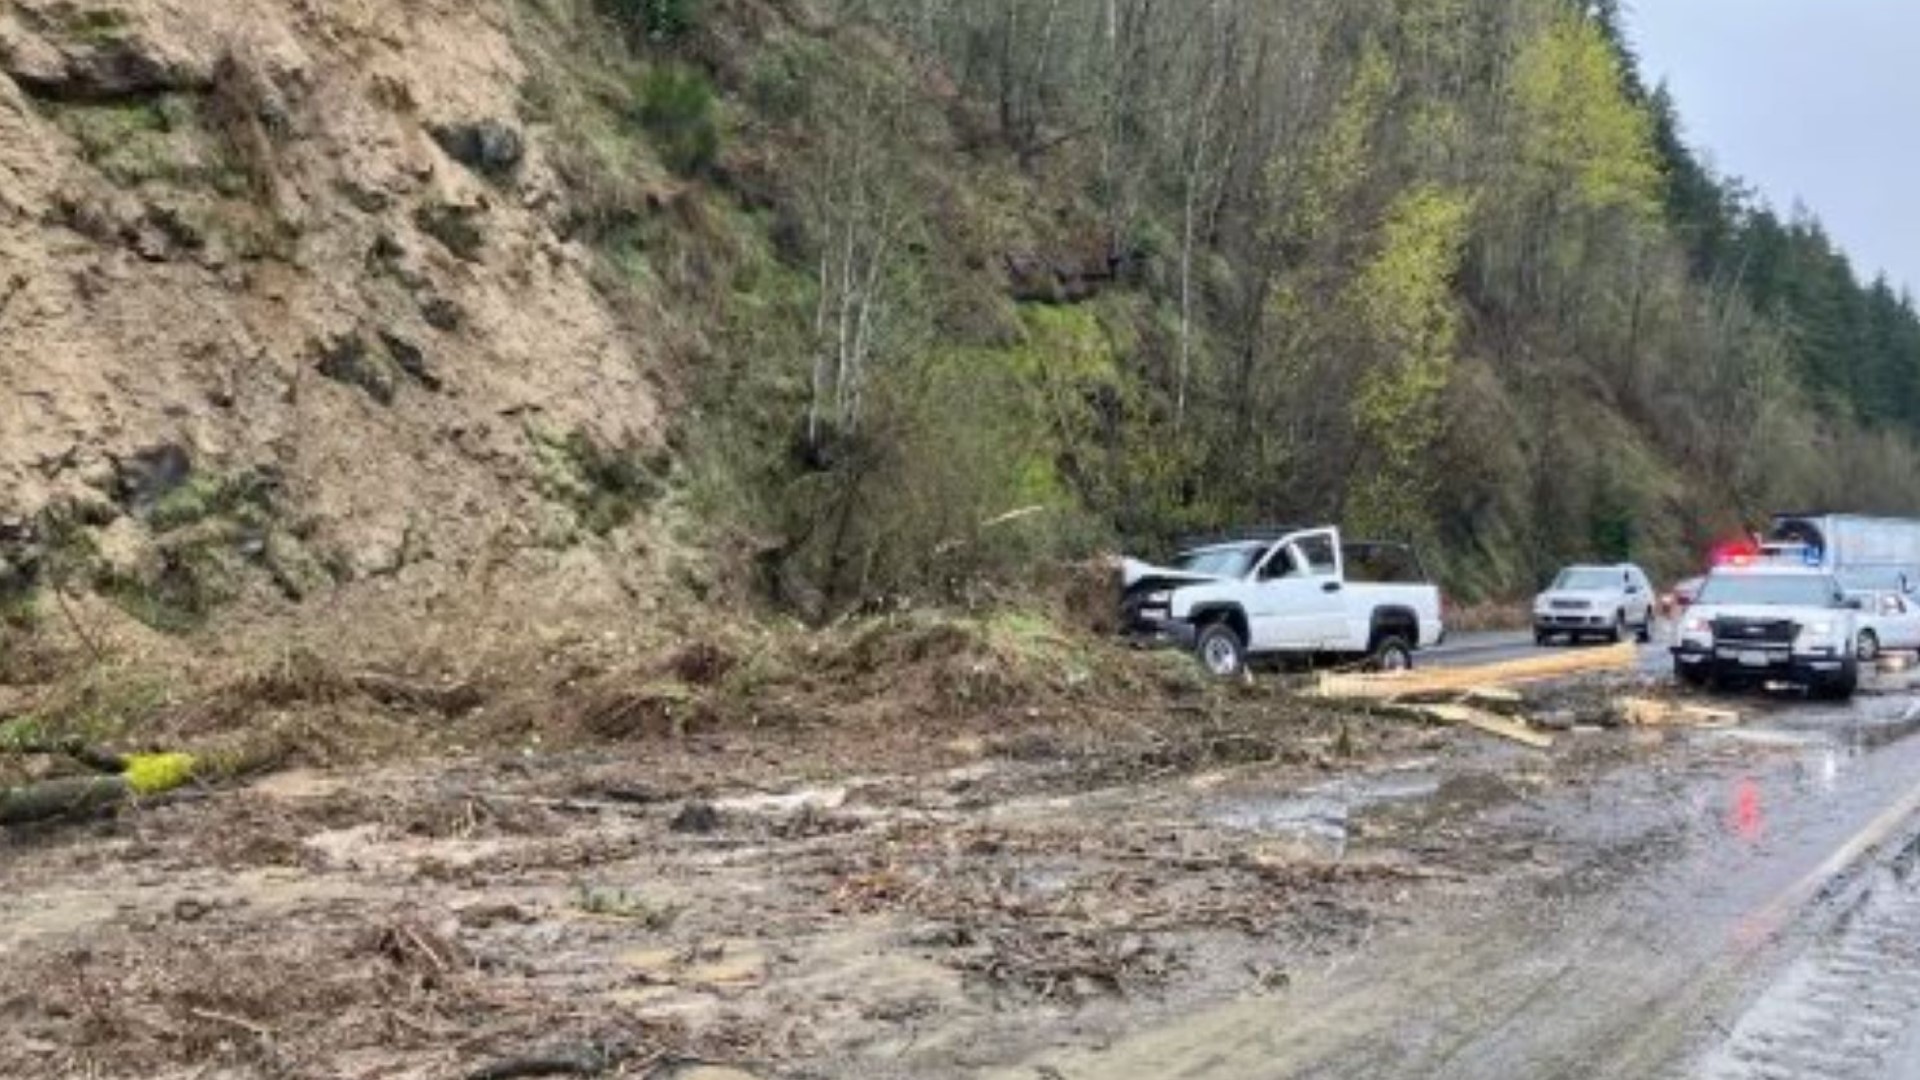 A landslide blocked all the Northbound lanes in the Woodland area. Debris struck two cars as a section of the hillside along I-5 came down.